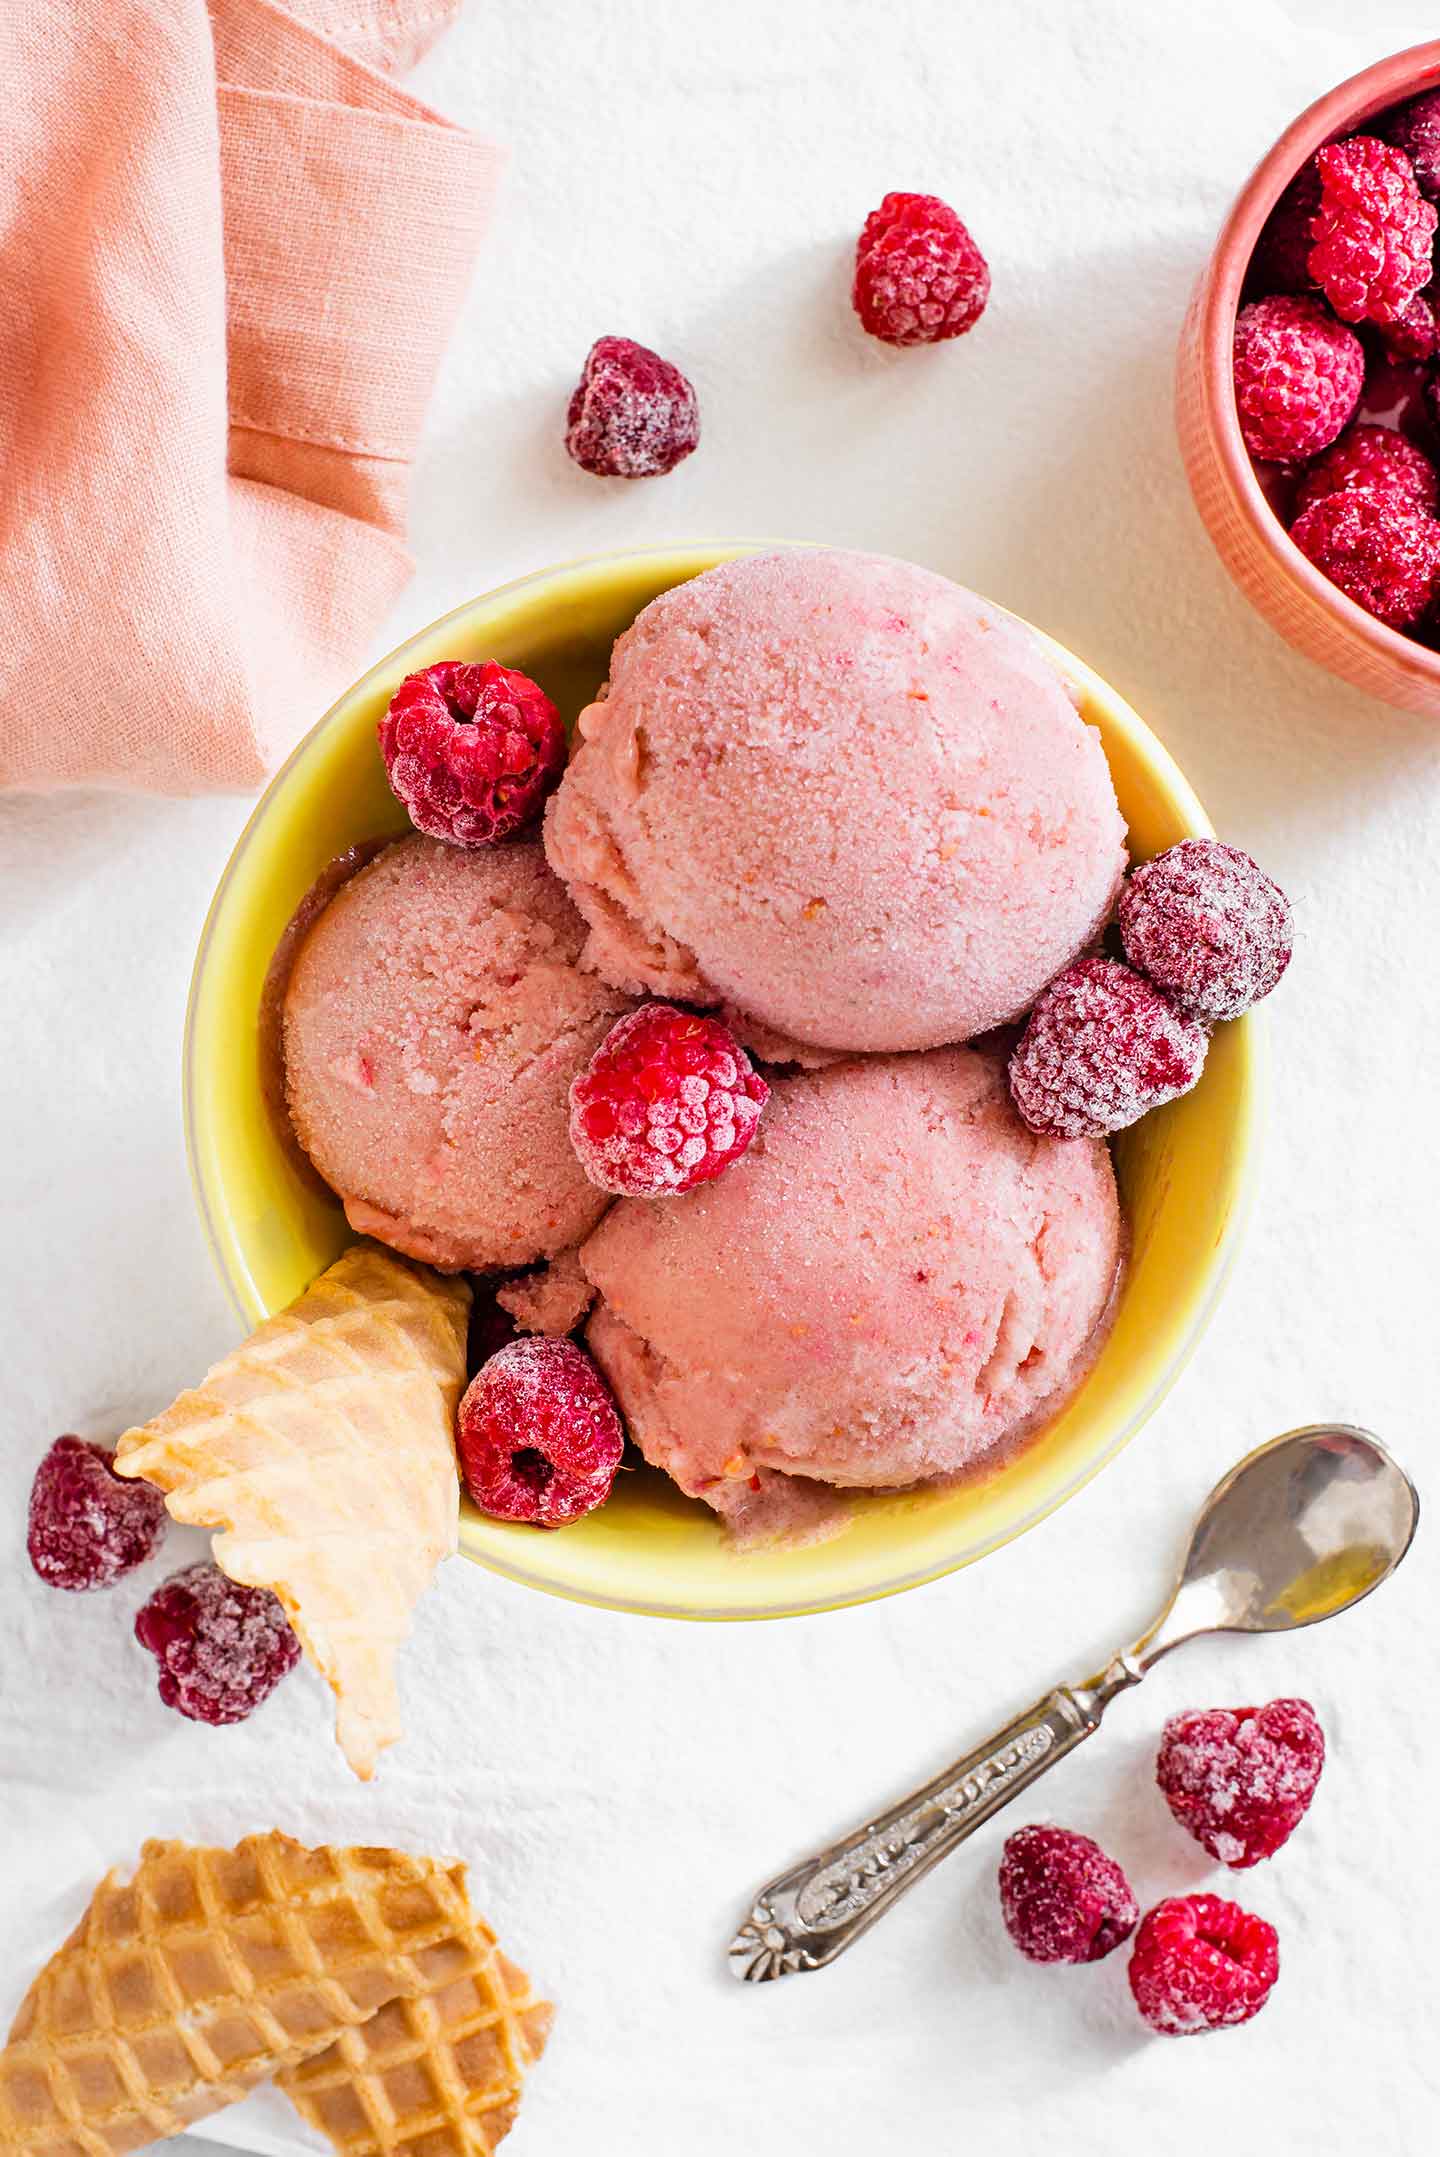 Top down view of three pink scoops of raspberry nice cream in a yellow sorbet cup with frozen raspberries and pieces of waffle cone scattered around.